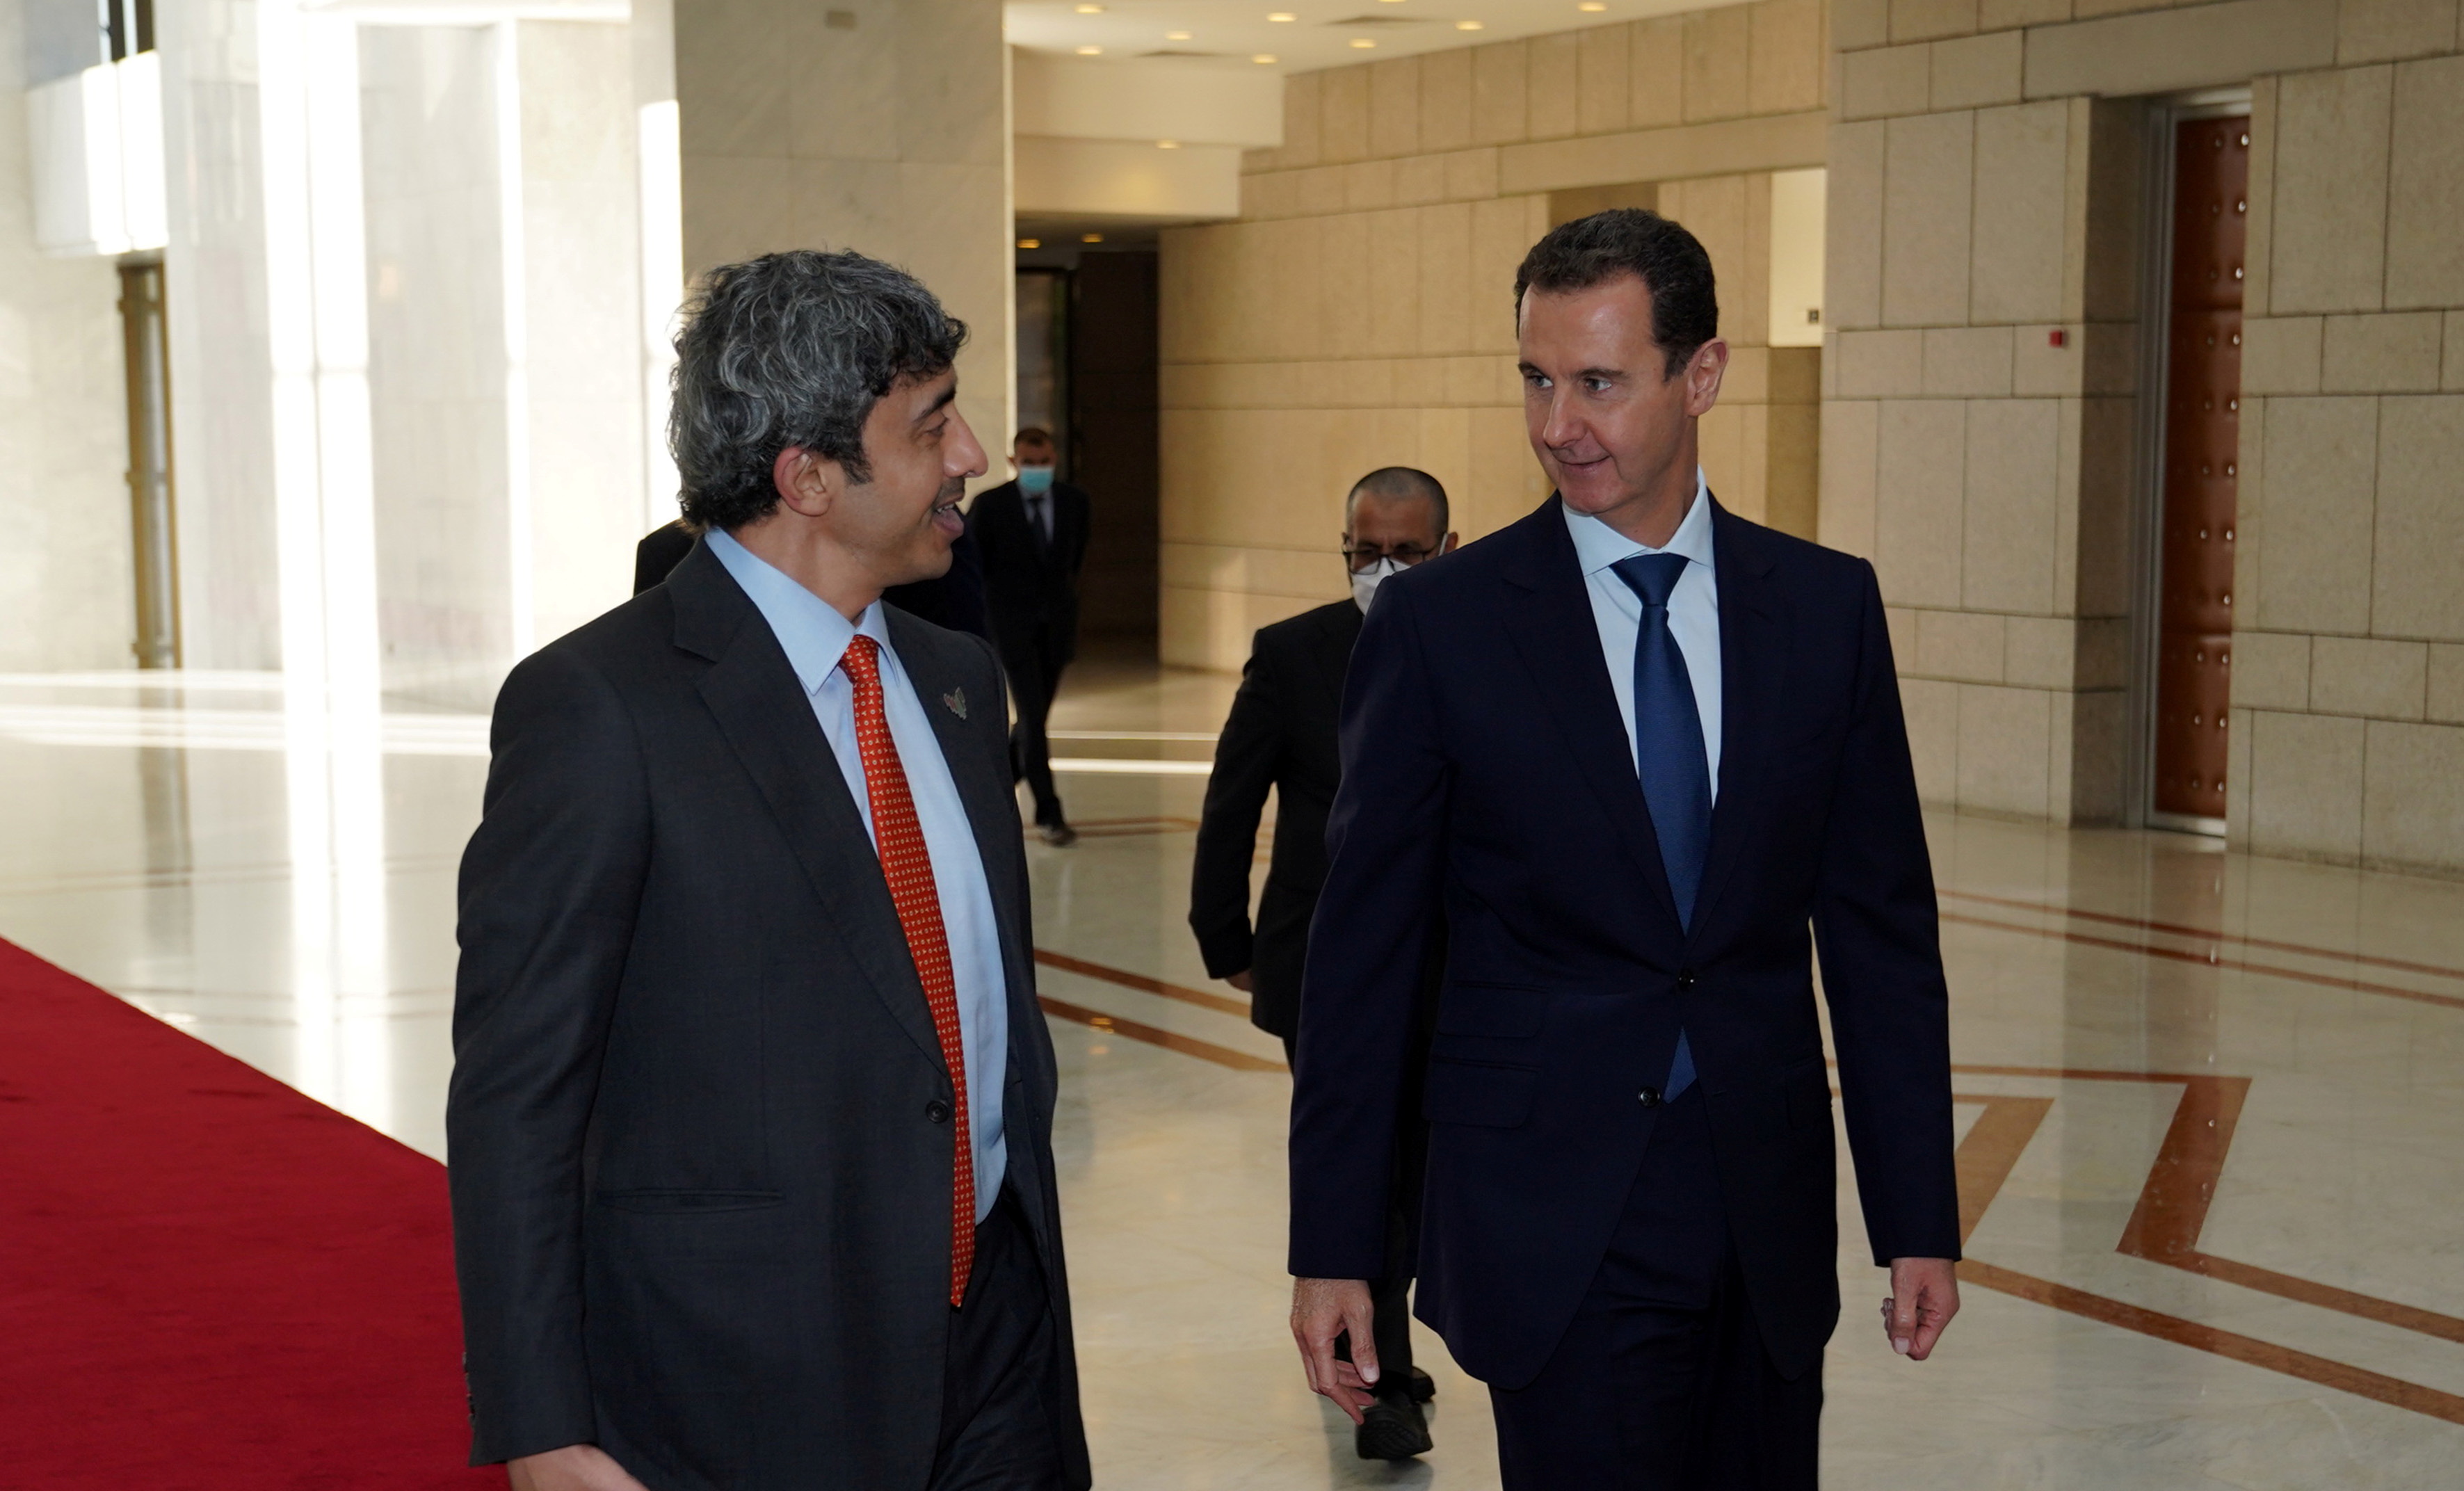 Syria's President Bashar al-Assad meets with United Arab Emirates Foreign Minister Sheikh Abdullah bin Zayed, in Damascus Syria, in this handout released by SANA November 9, 2021. SANA/Handout via REUTERS 